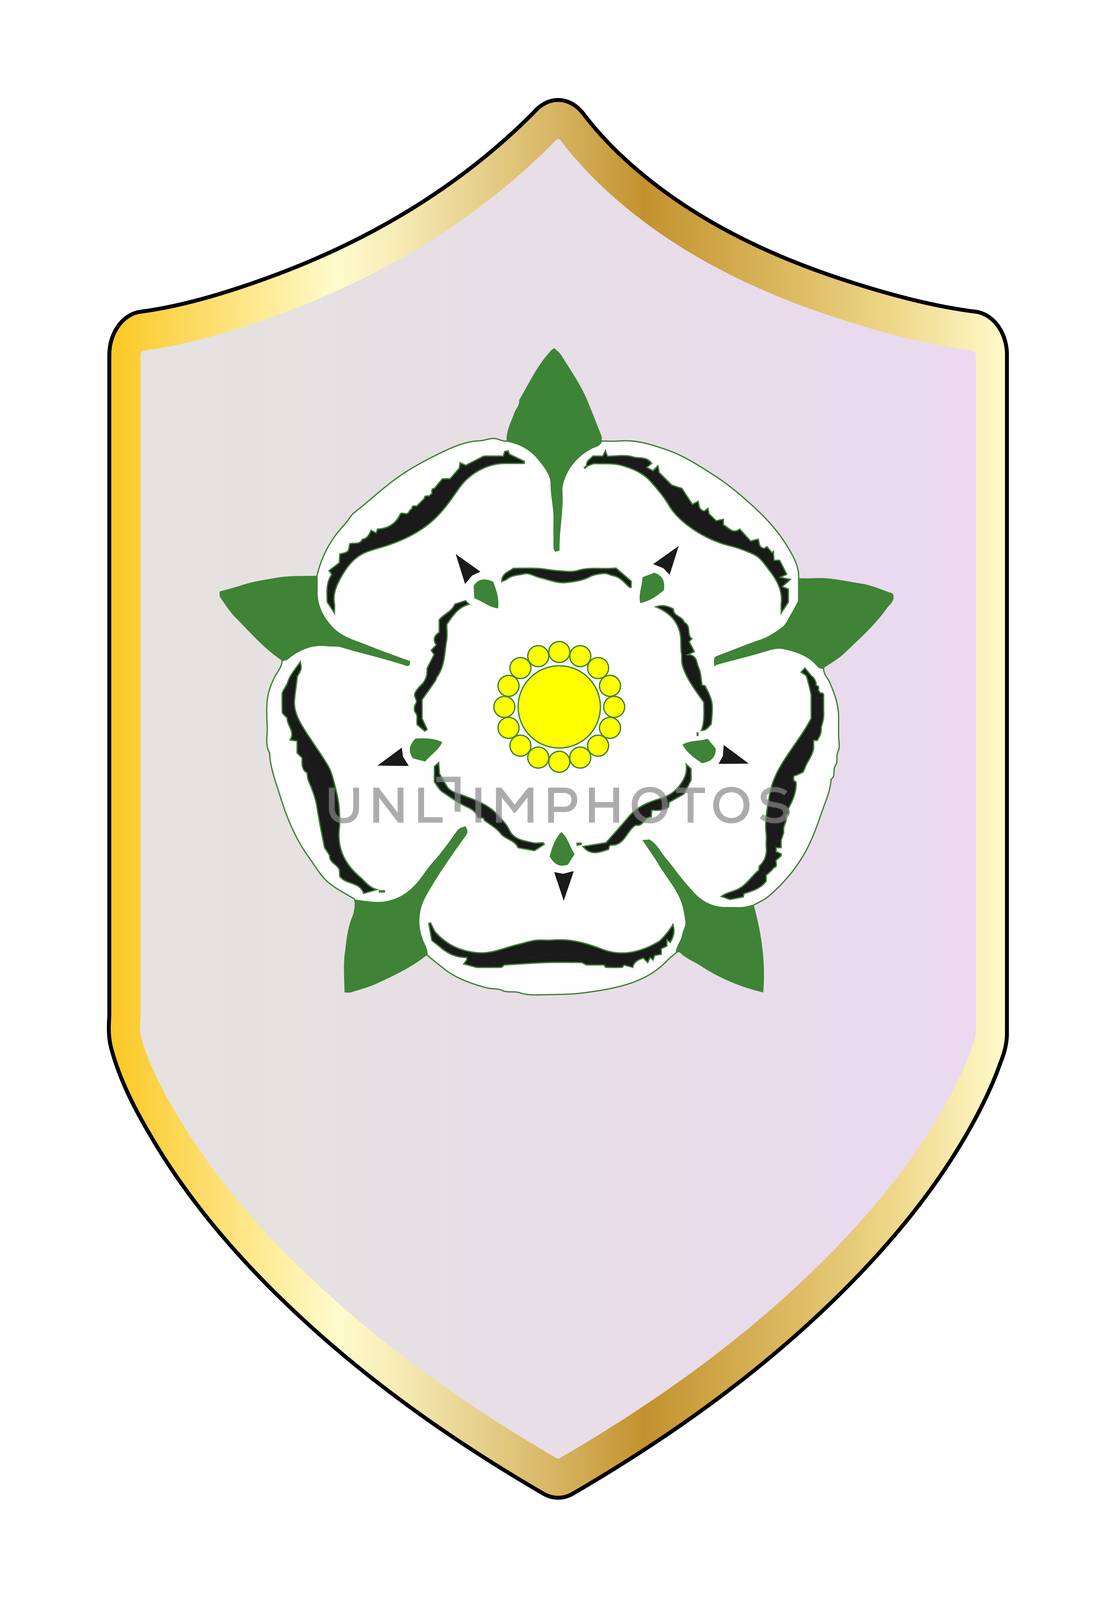 The shield and emblem of the York side in the War of the Roses